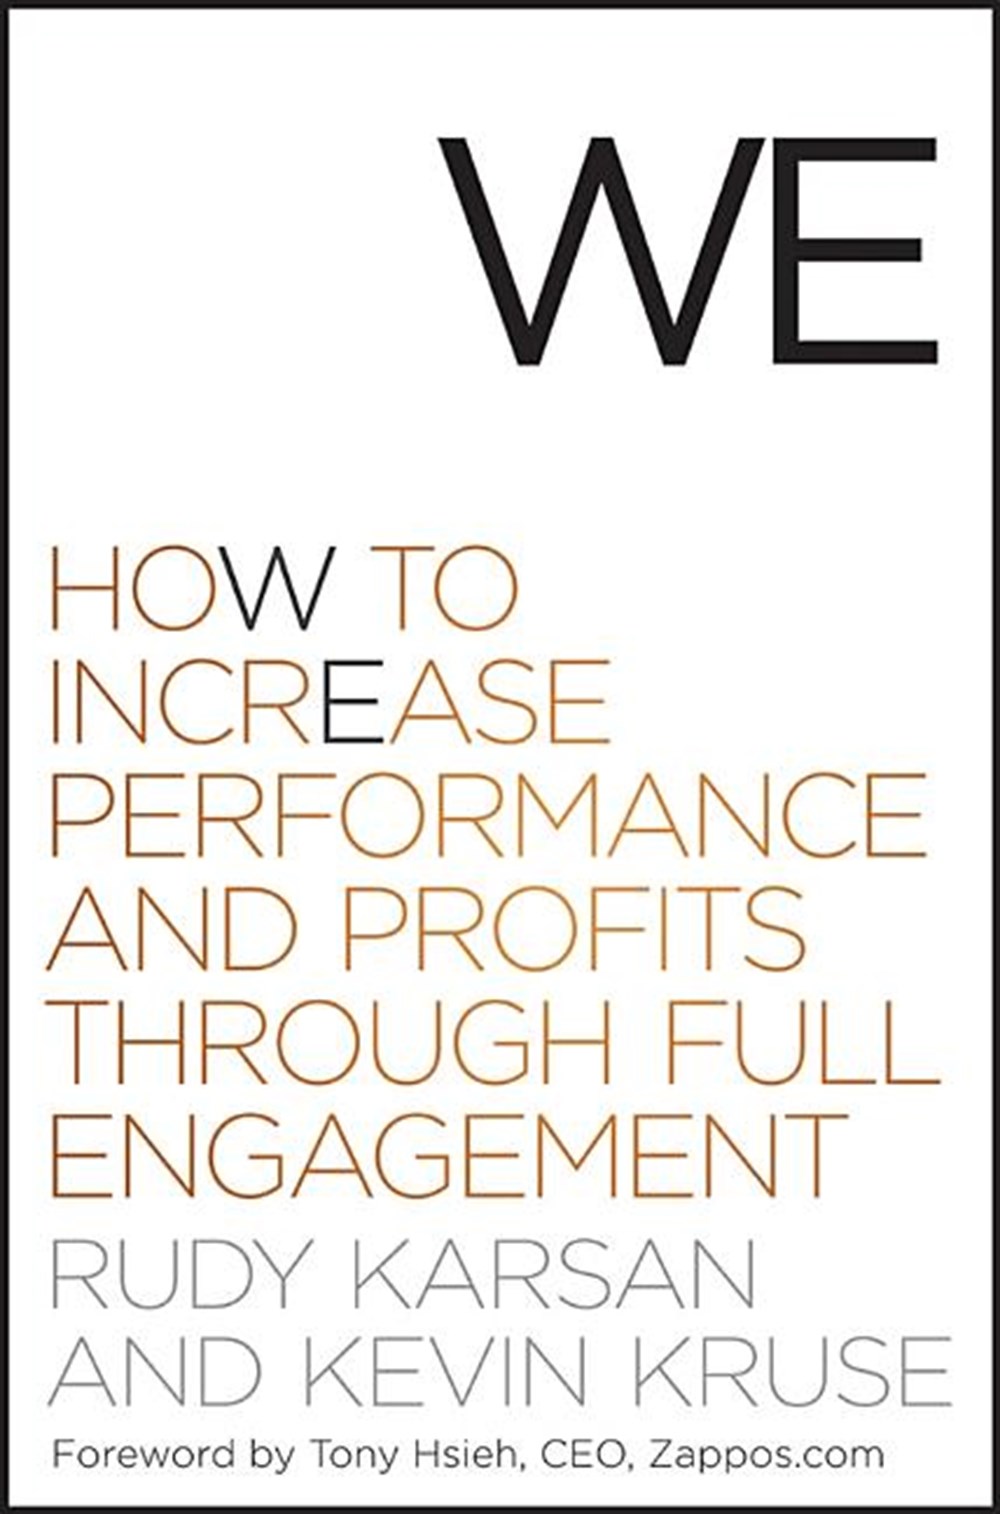 We How to Increase Performance and Profits Through Full Engagement